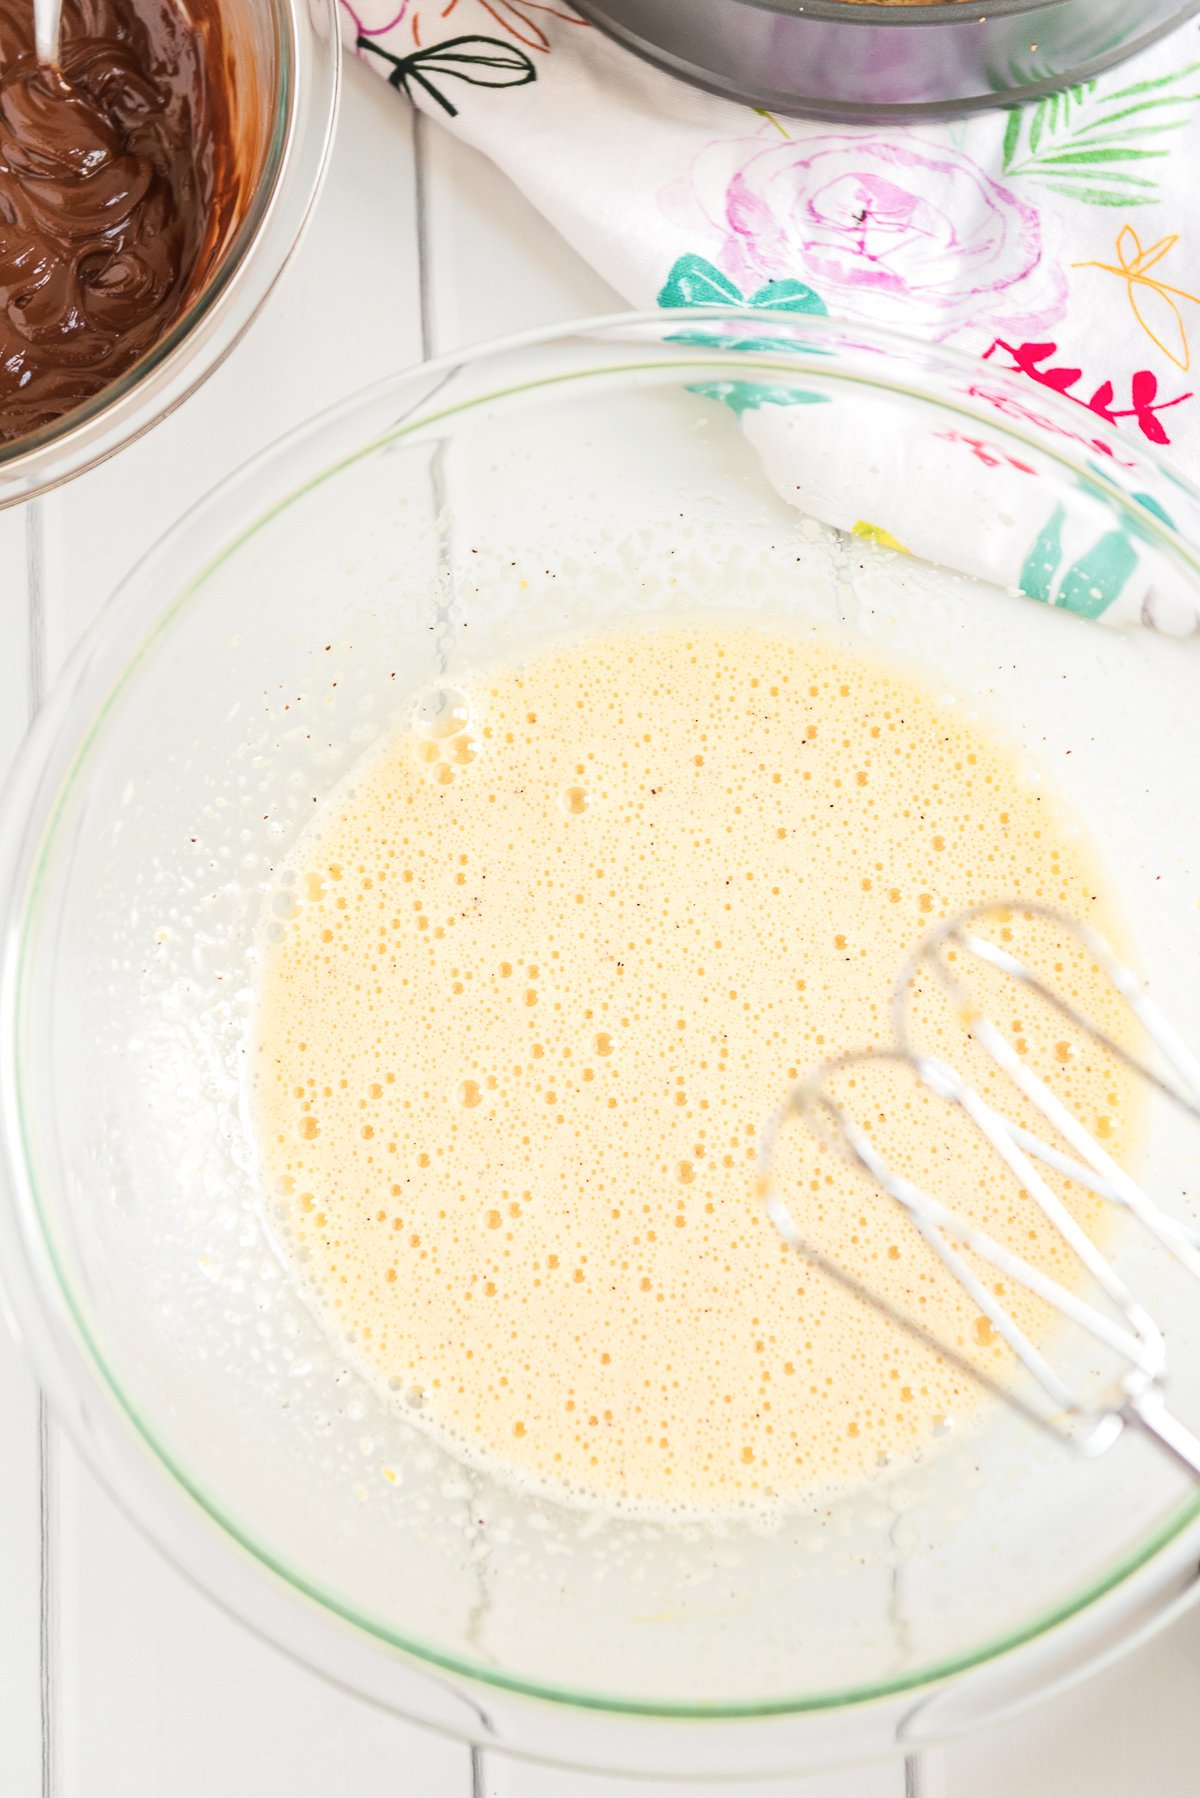 Eggs, sugar, coffee granules, and vanilla that have been beaten together in a glass mixing bowl